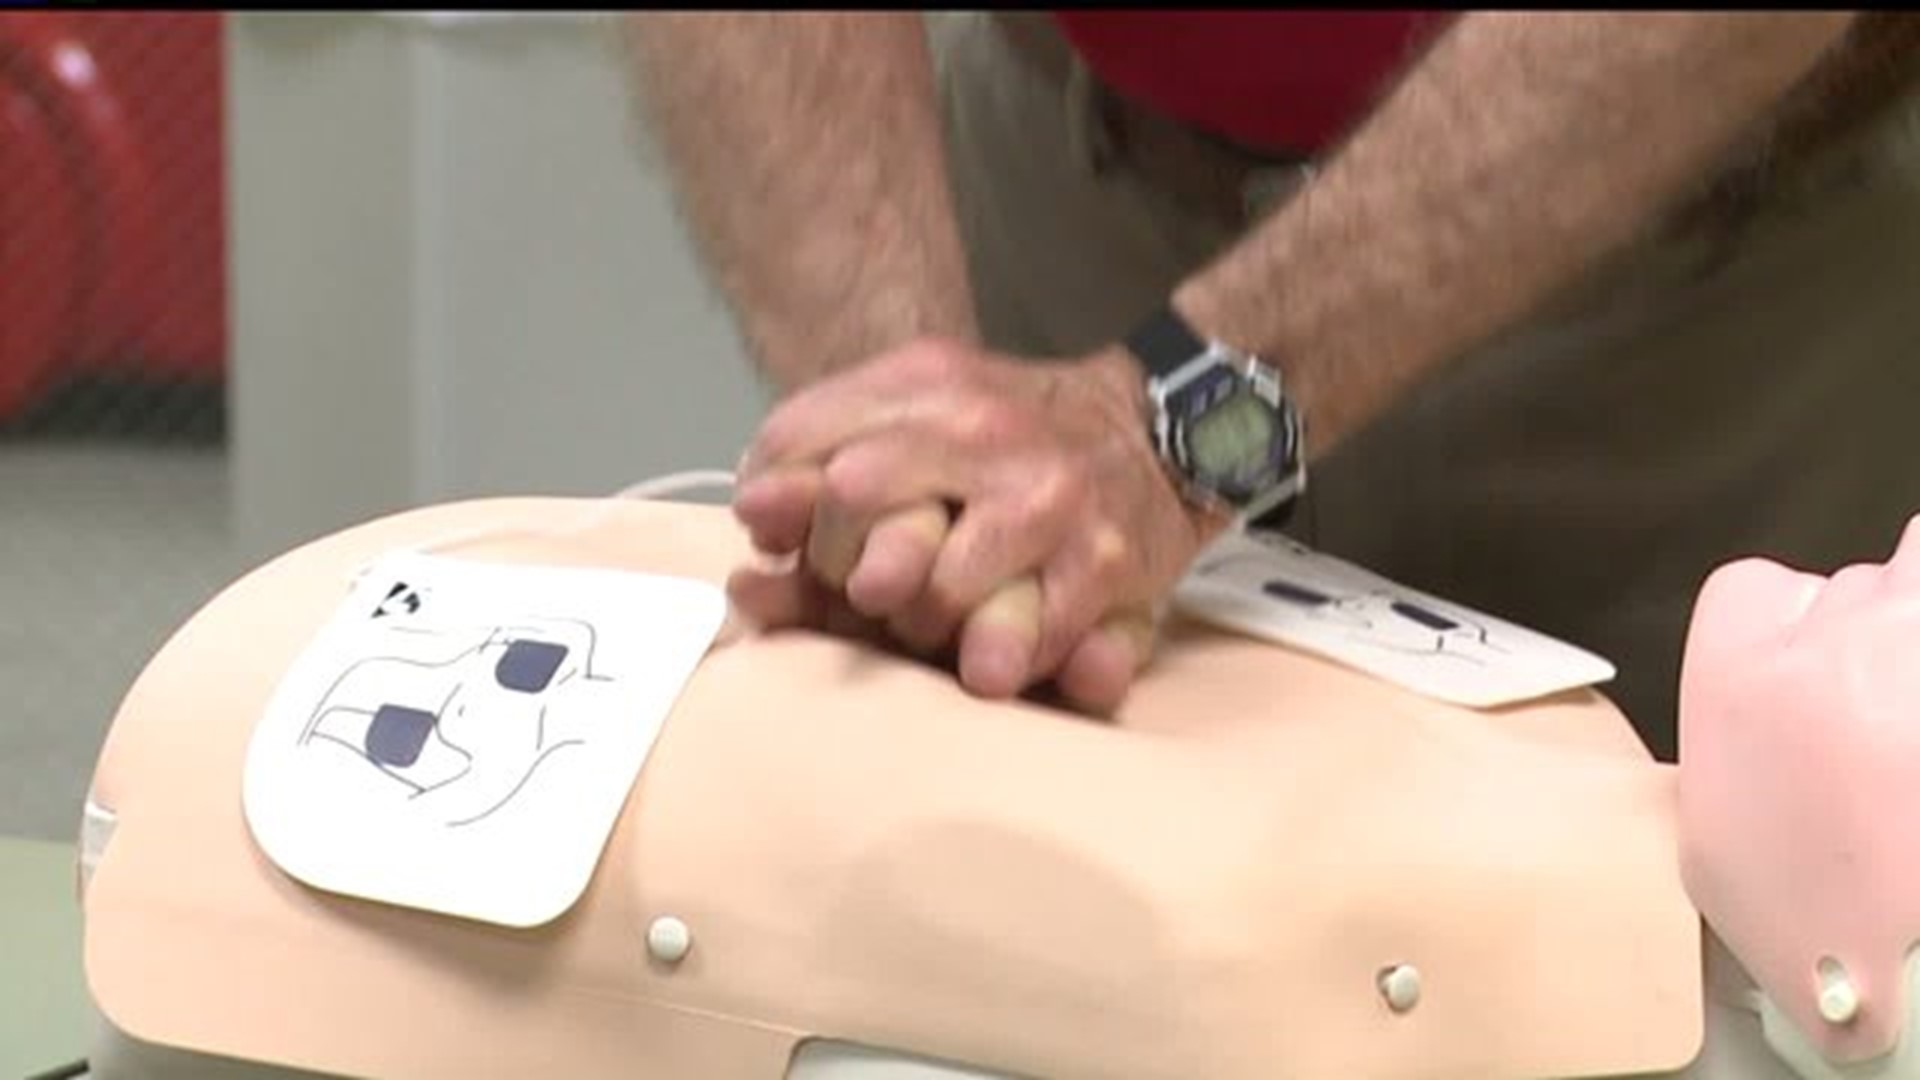 In light of Damar Hamlin's recent injury, FOX43 spoke to a healthcare professional about how to properly care for someone experiencing a cardiac arrest.